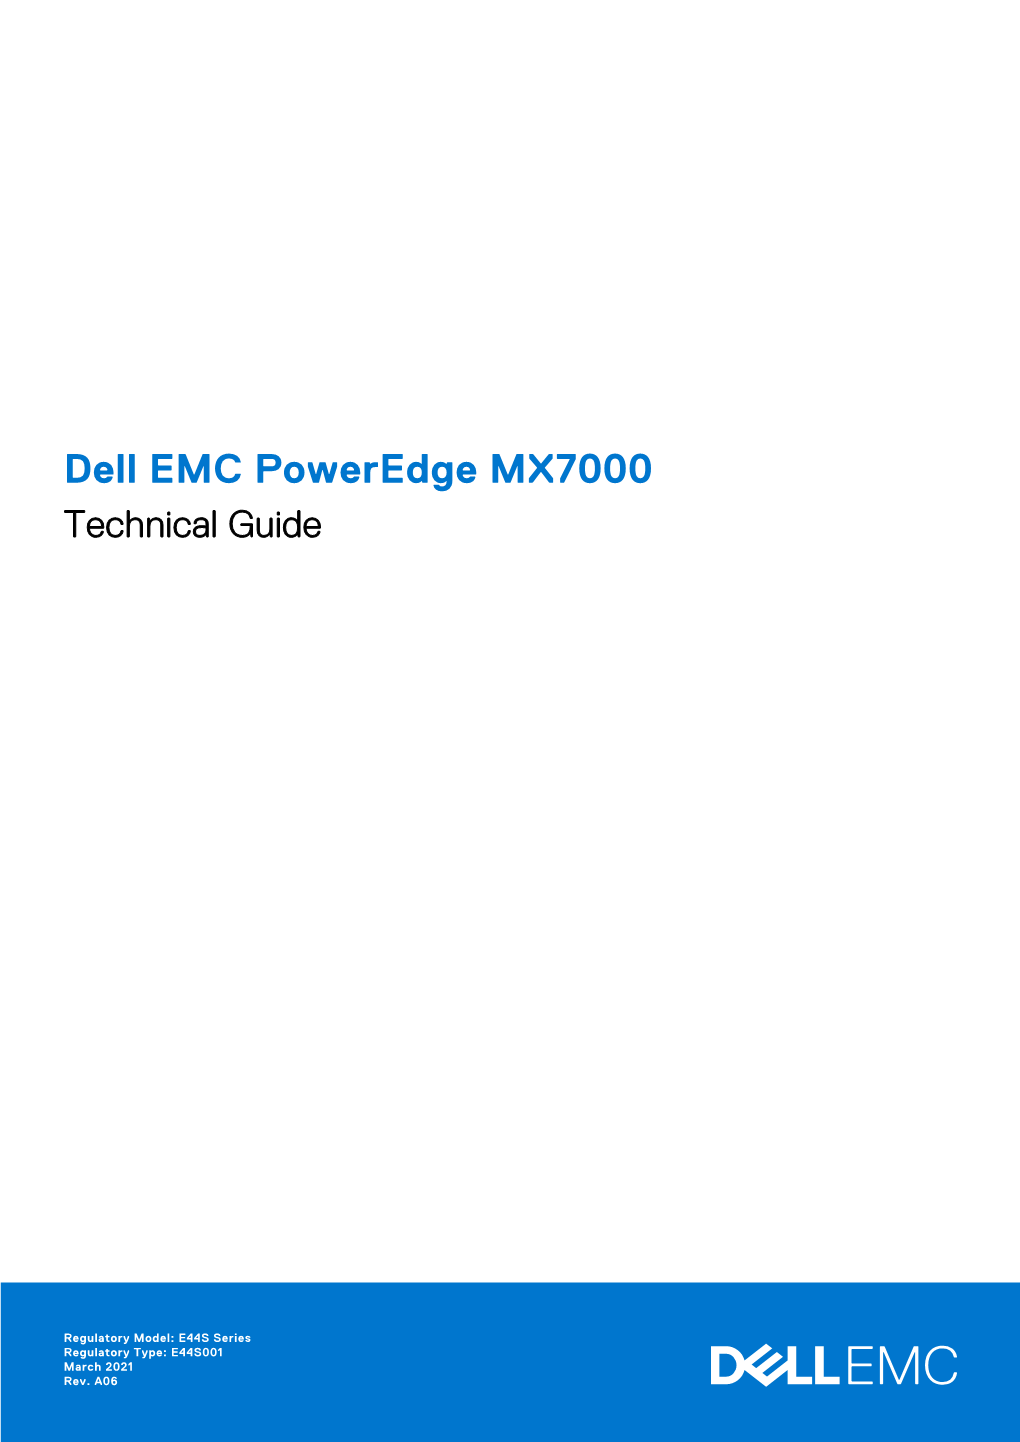 Dell EMC Poweredge R740 and R740xd Technical Guide